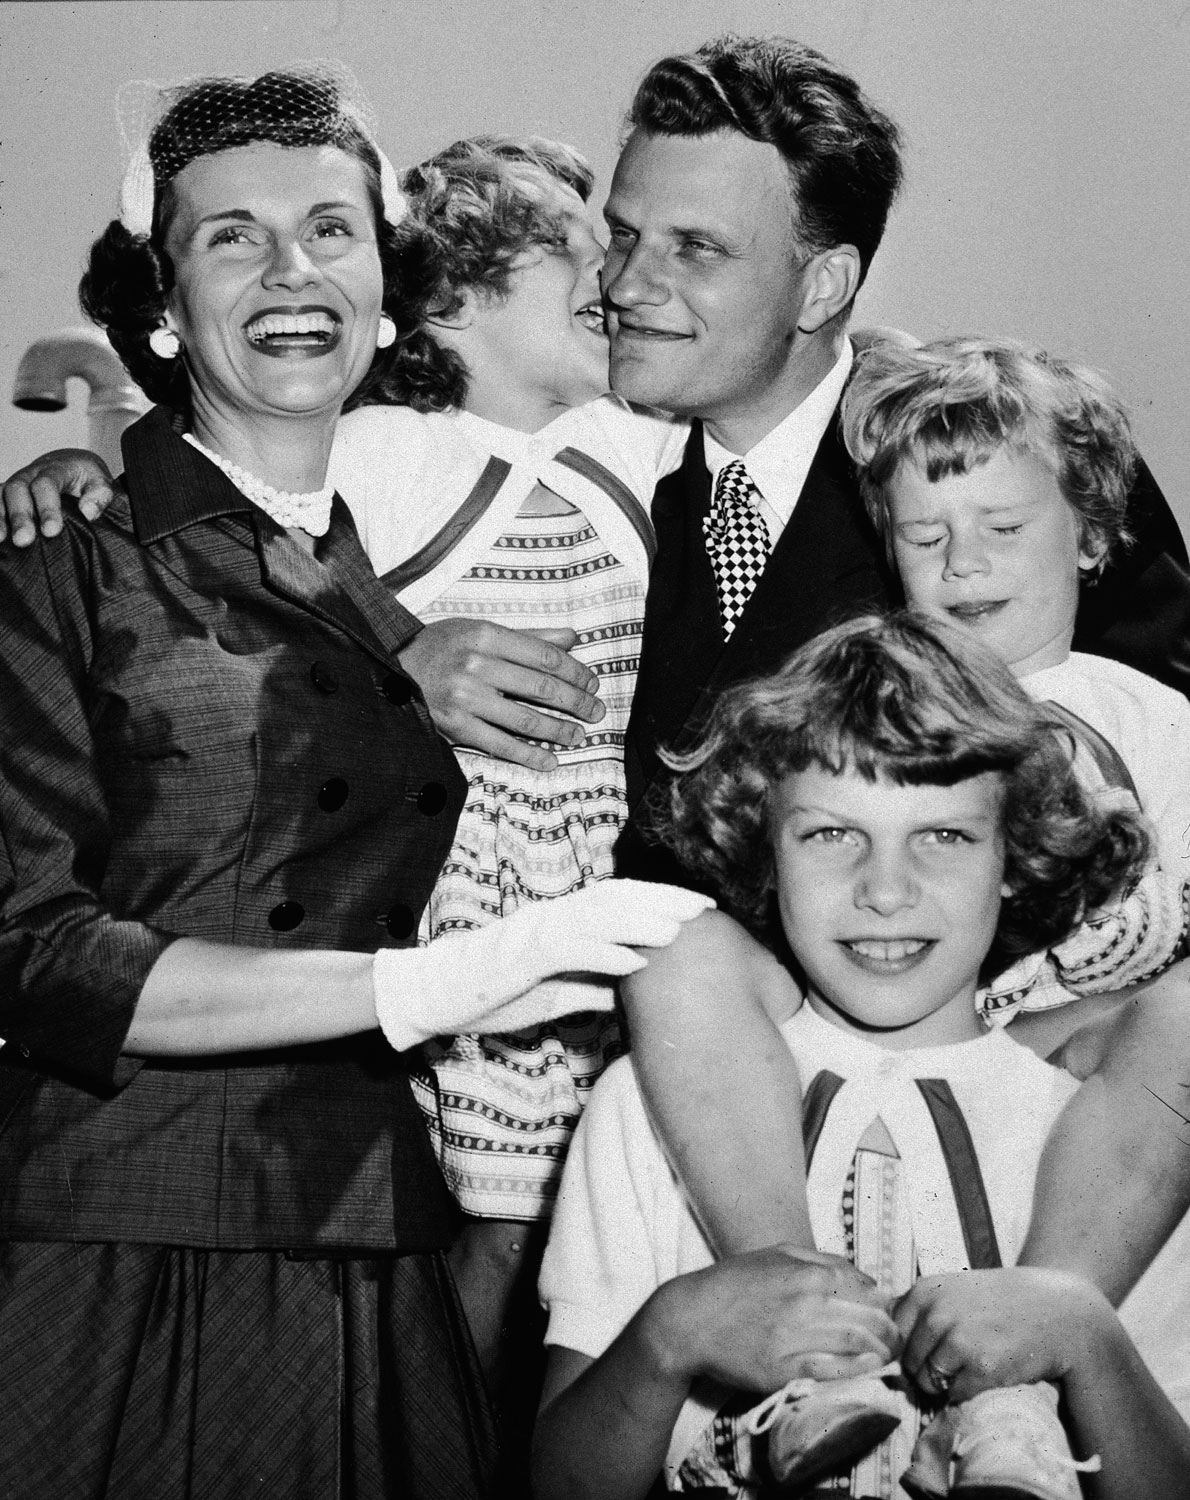 After returning from his 'Crusade for Christ' tour, Graham embraces his wife, Ruth, and his children in New York.